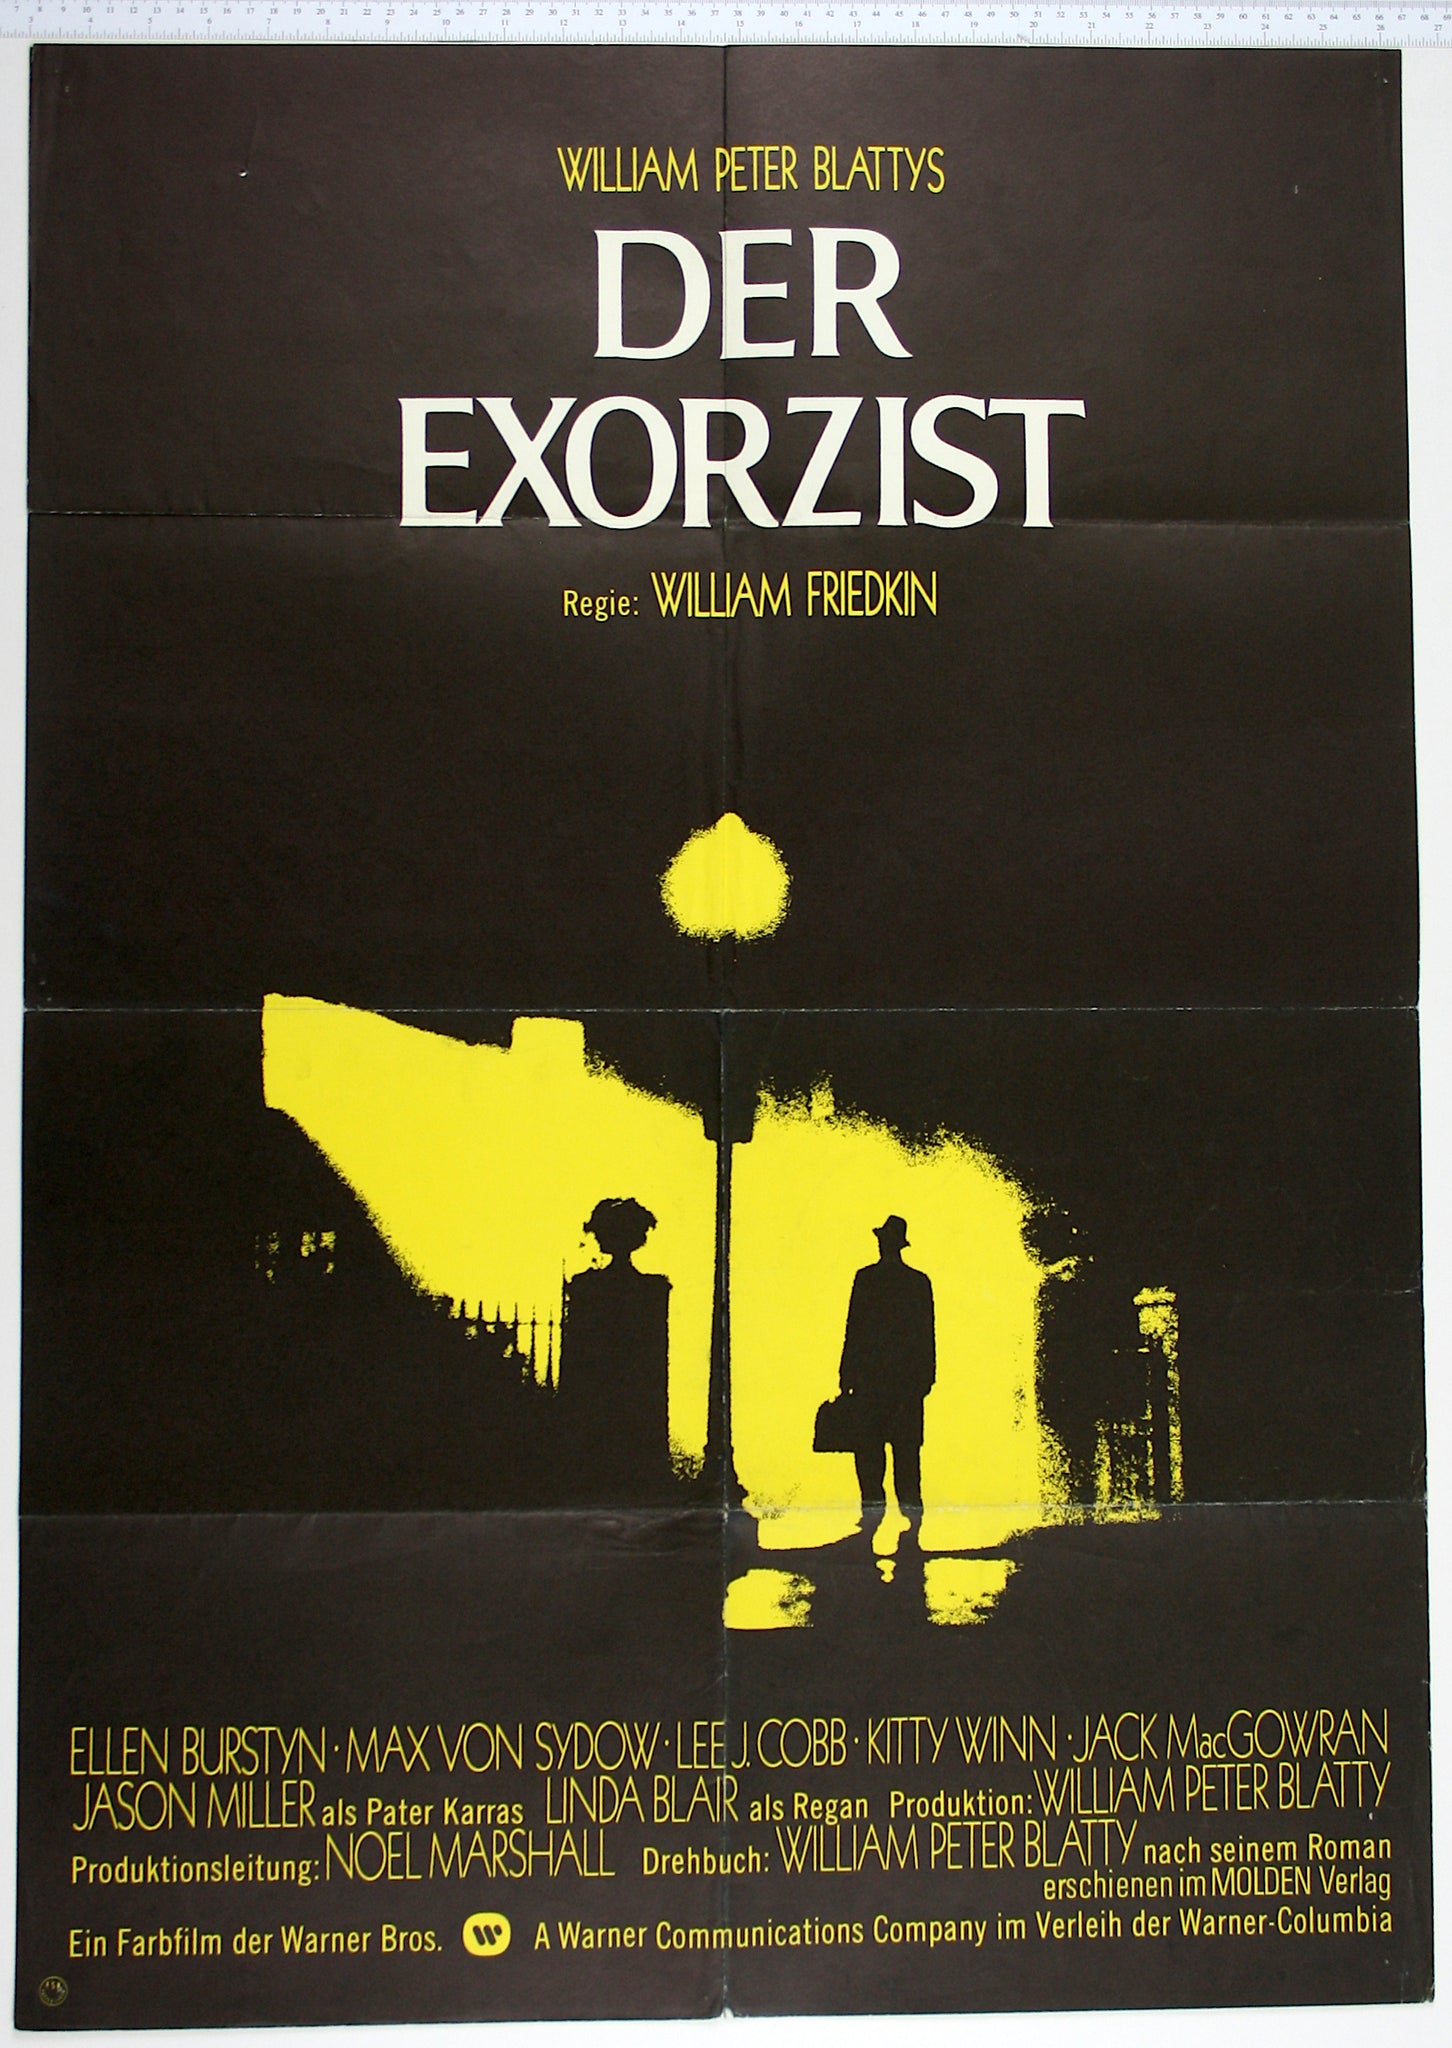 High contrast yellow image of exorcist arriving at house. Street lamp casts shaft of light, making a silhouette of the priest.